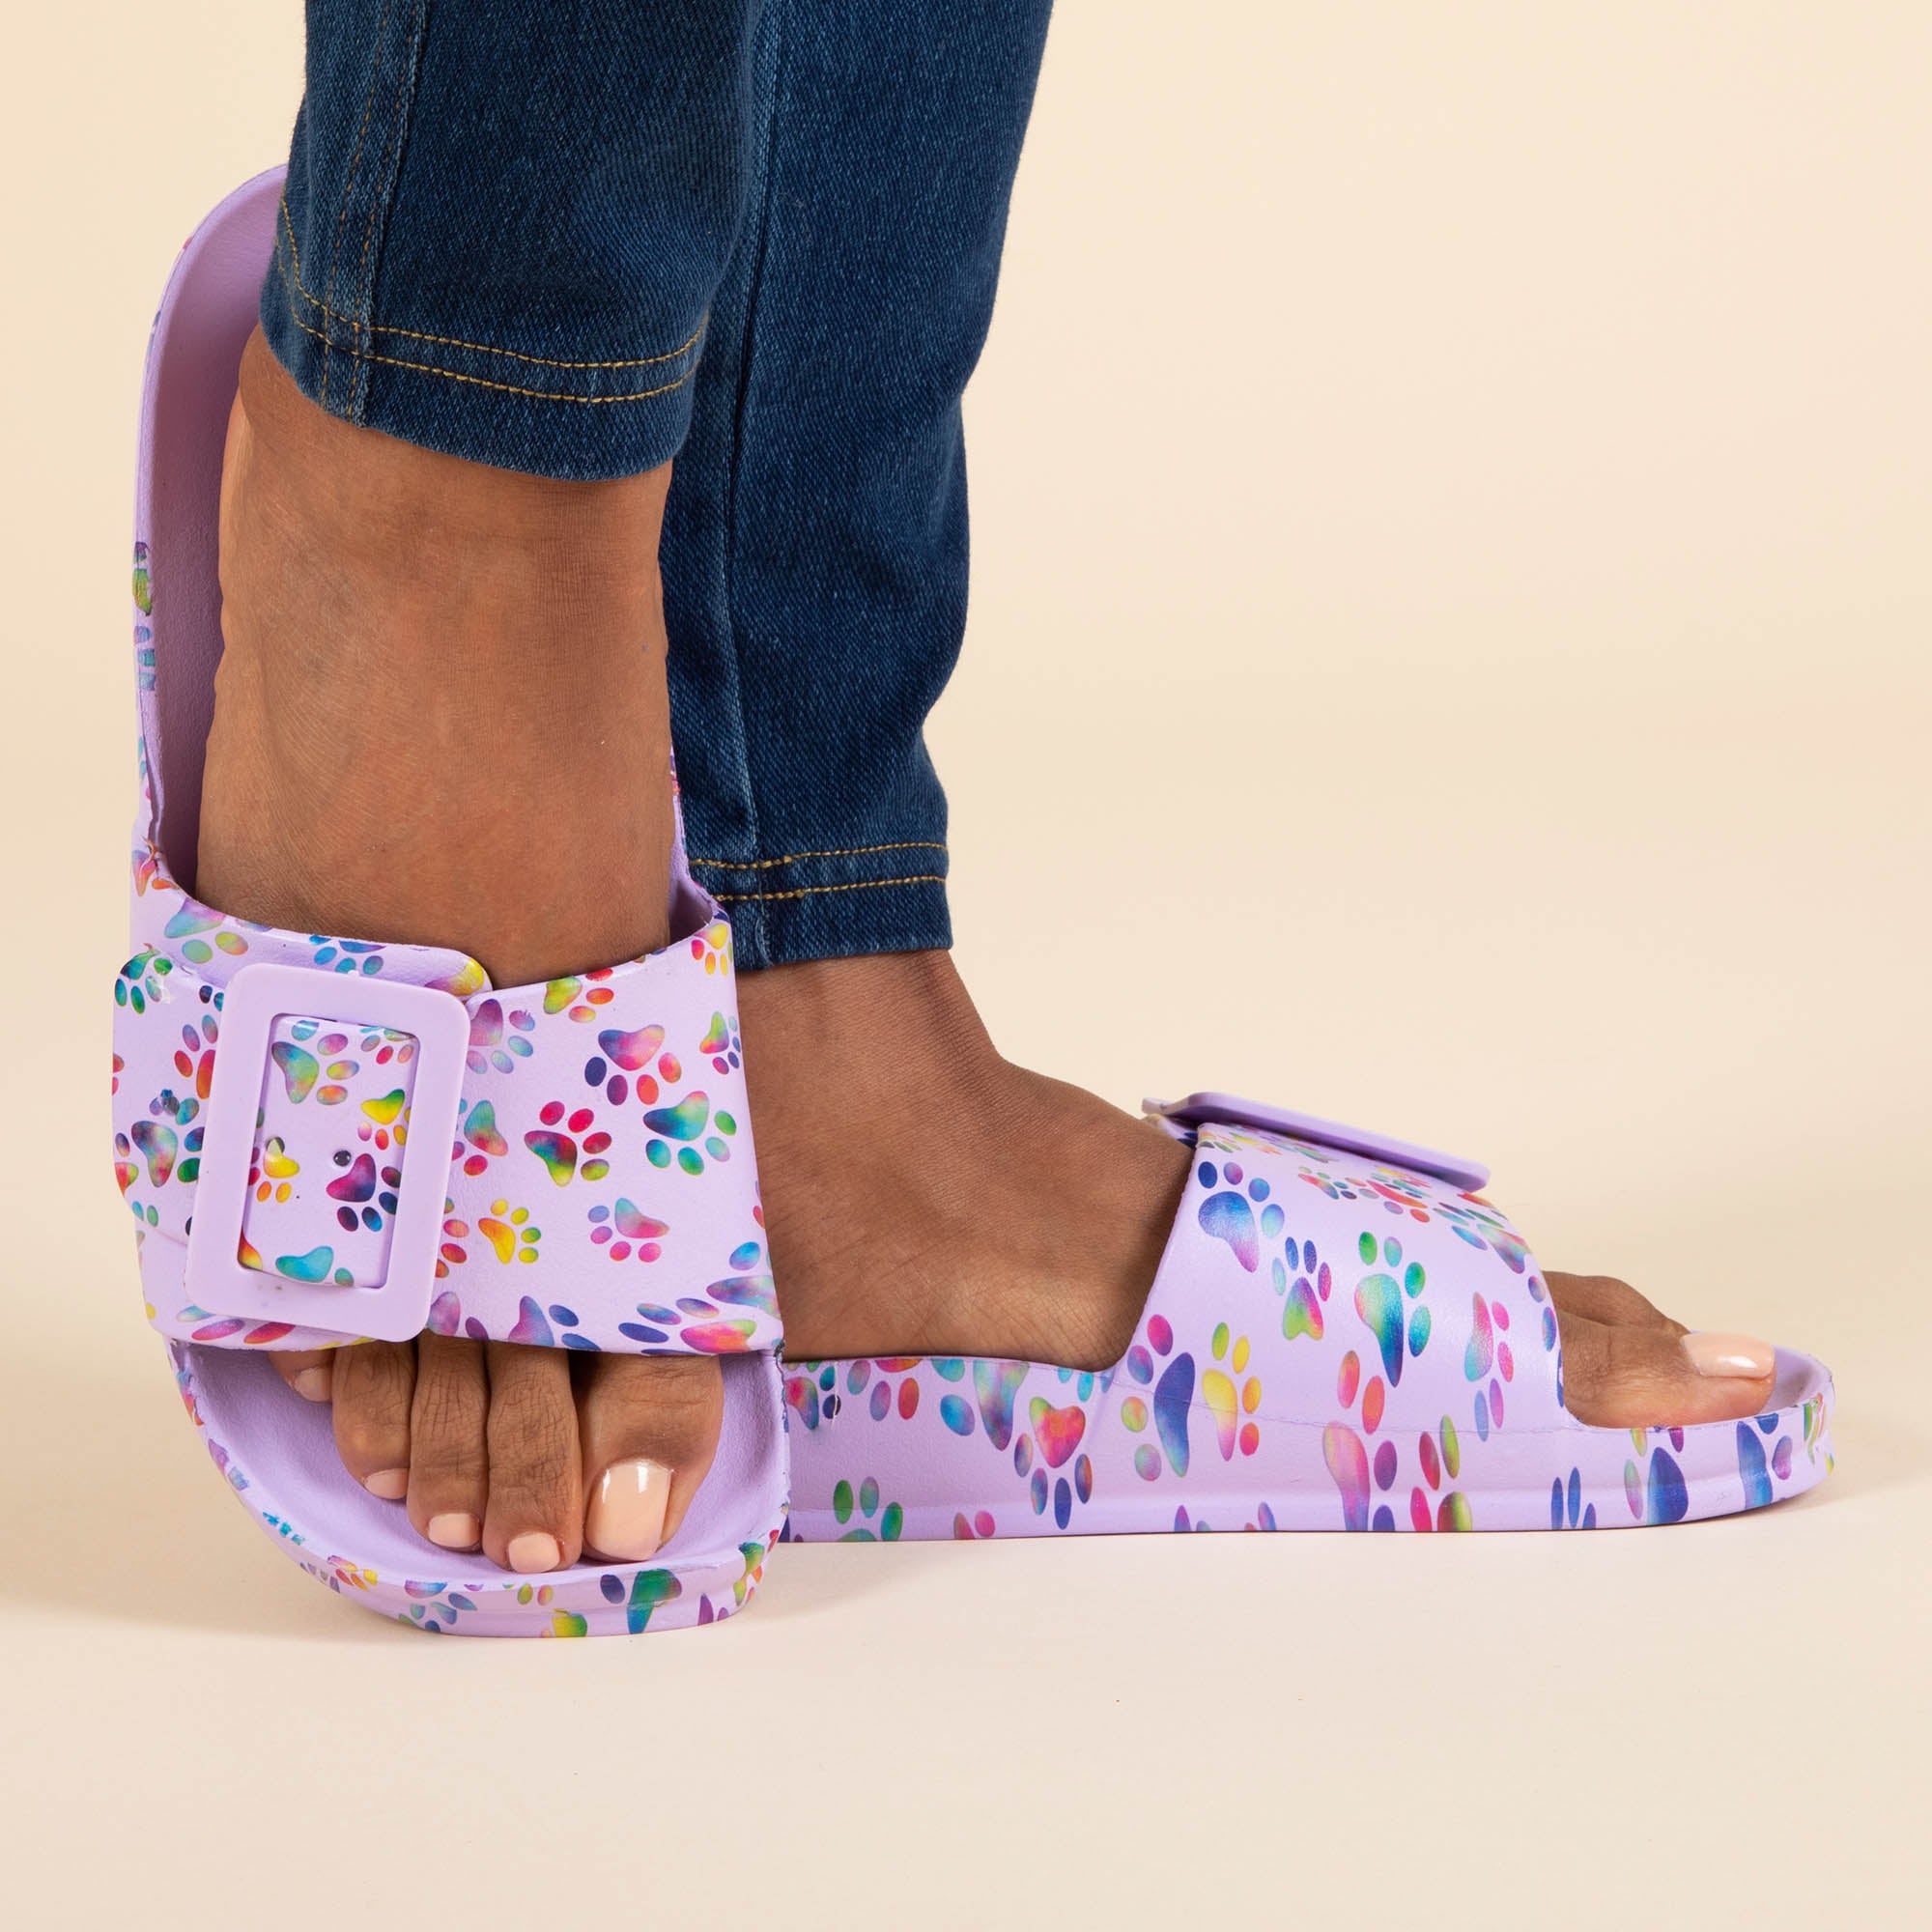 Paw Print Single Buckle Slide Sandals - Bold & Bright Paws - 7